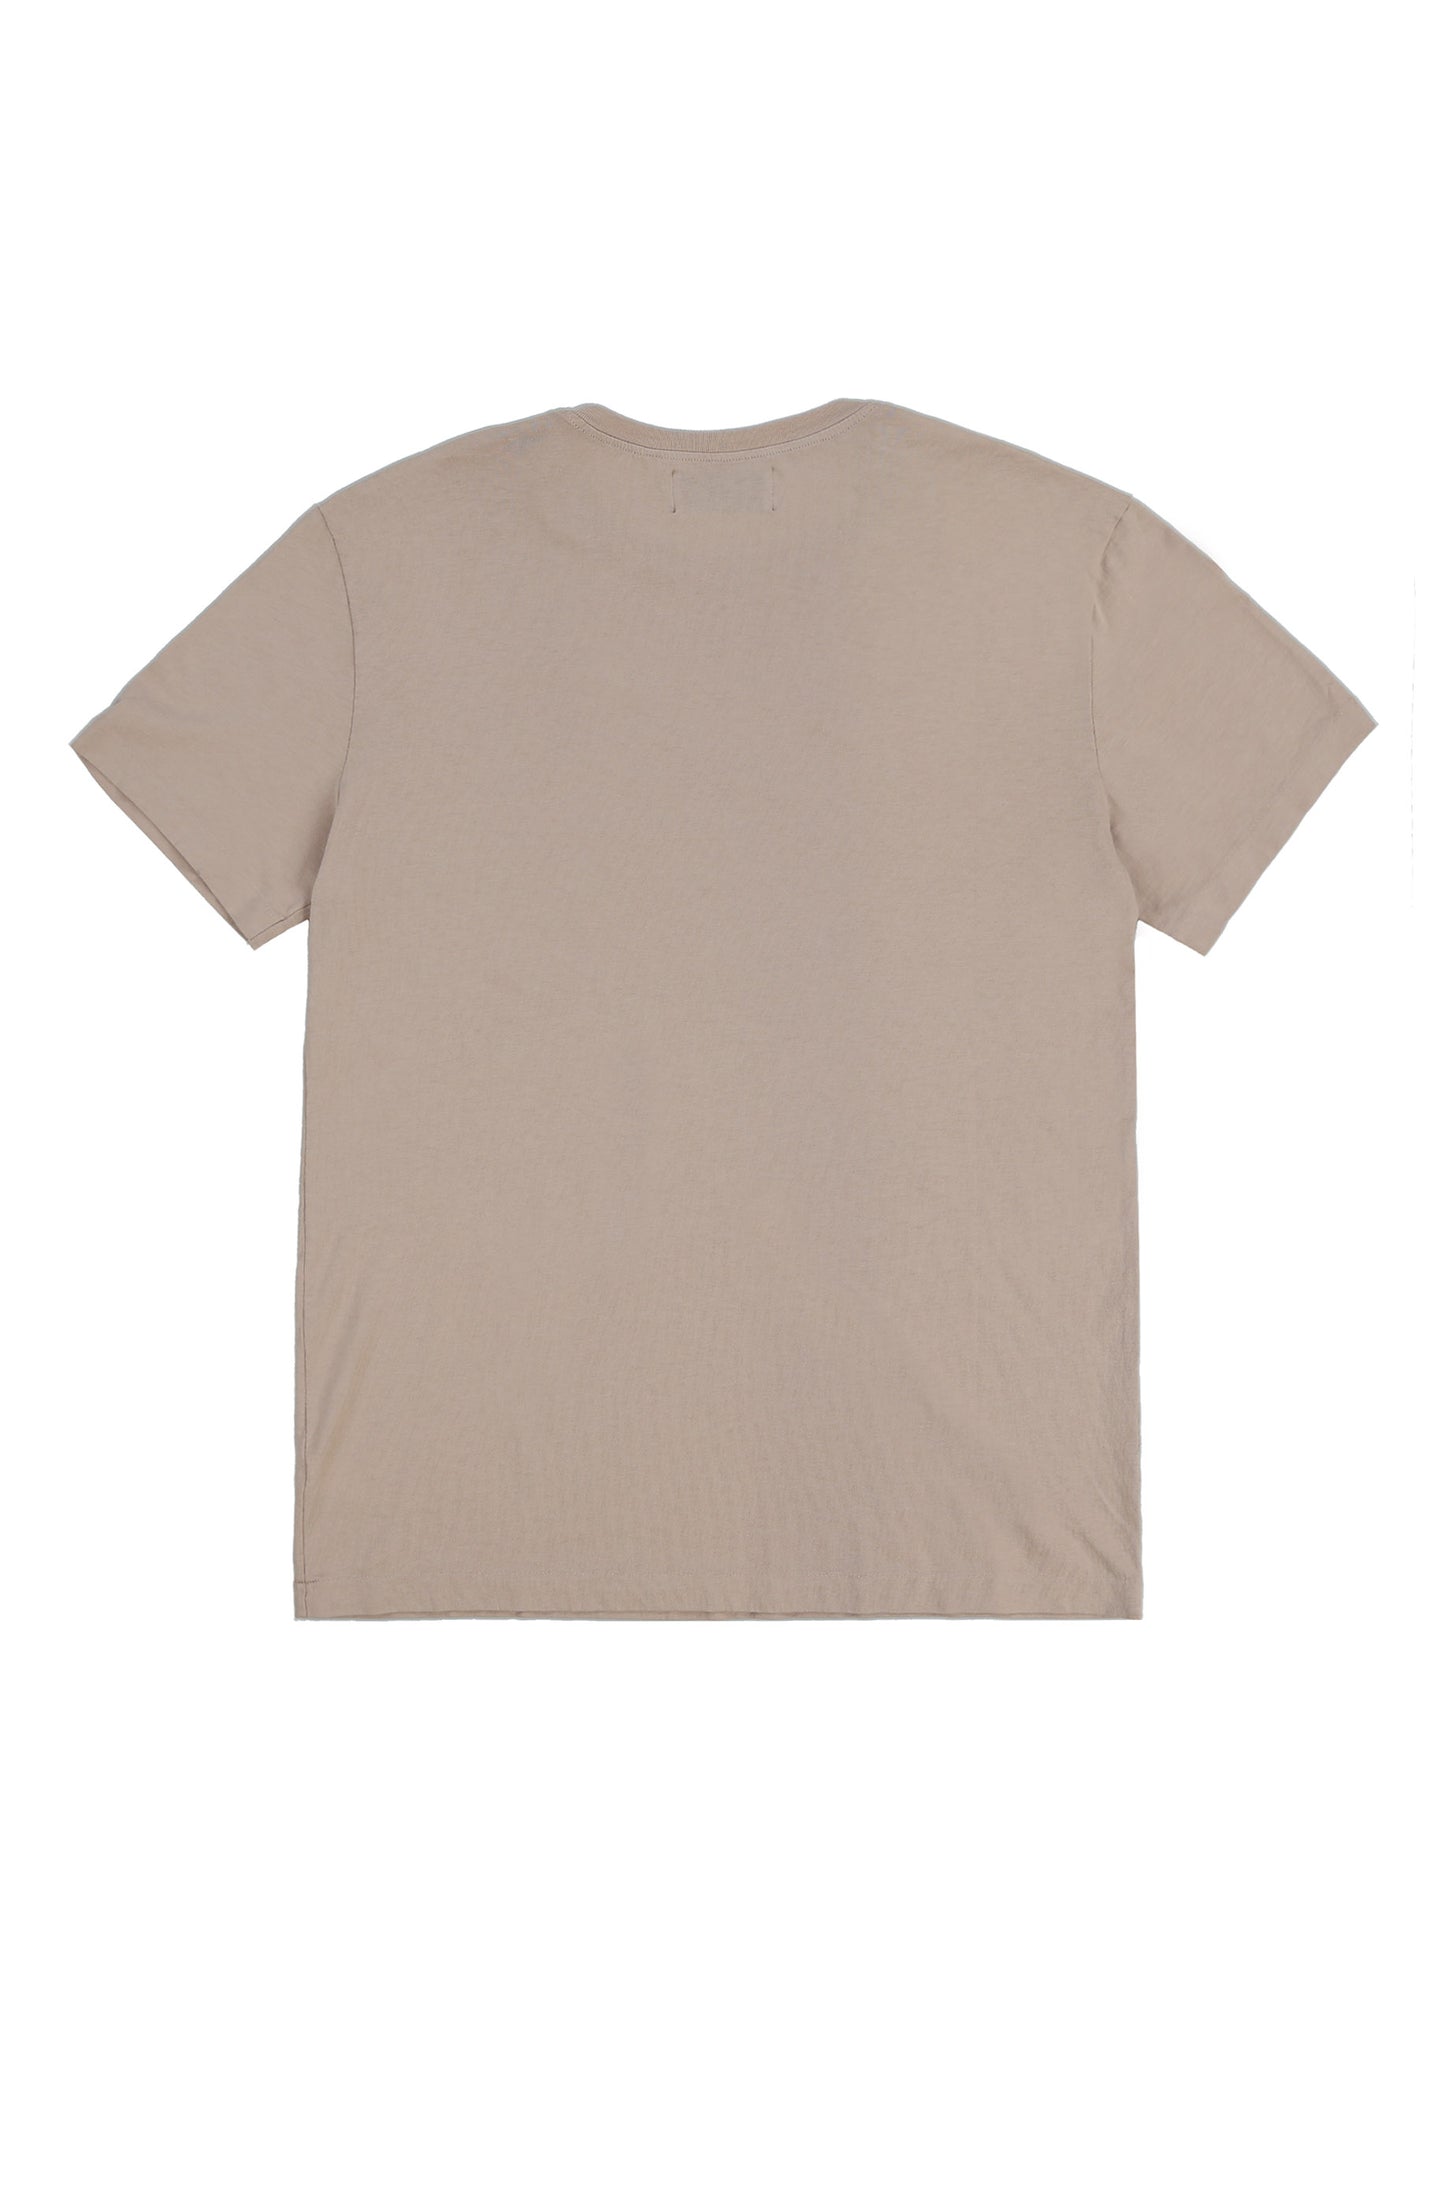 OYSTER NECK LAYERING TEE (NUDE)